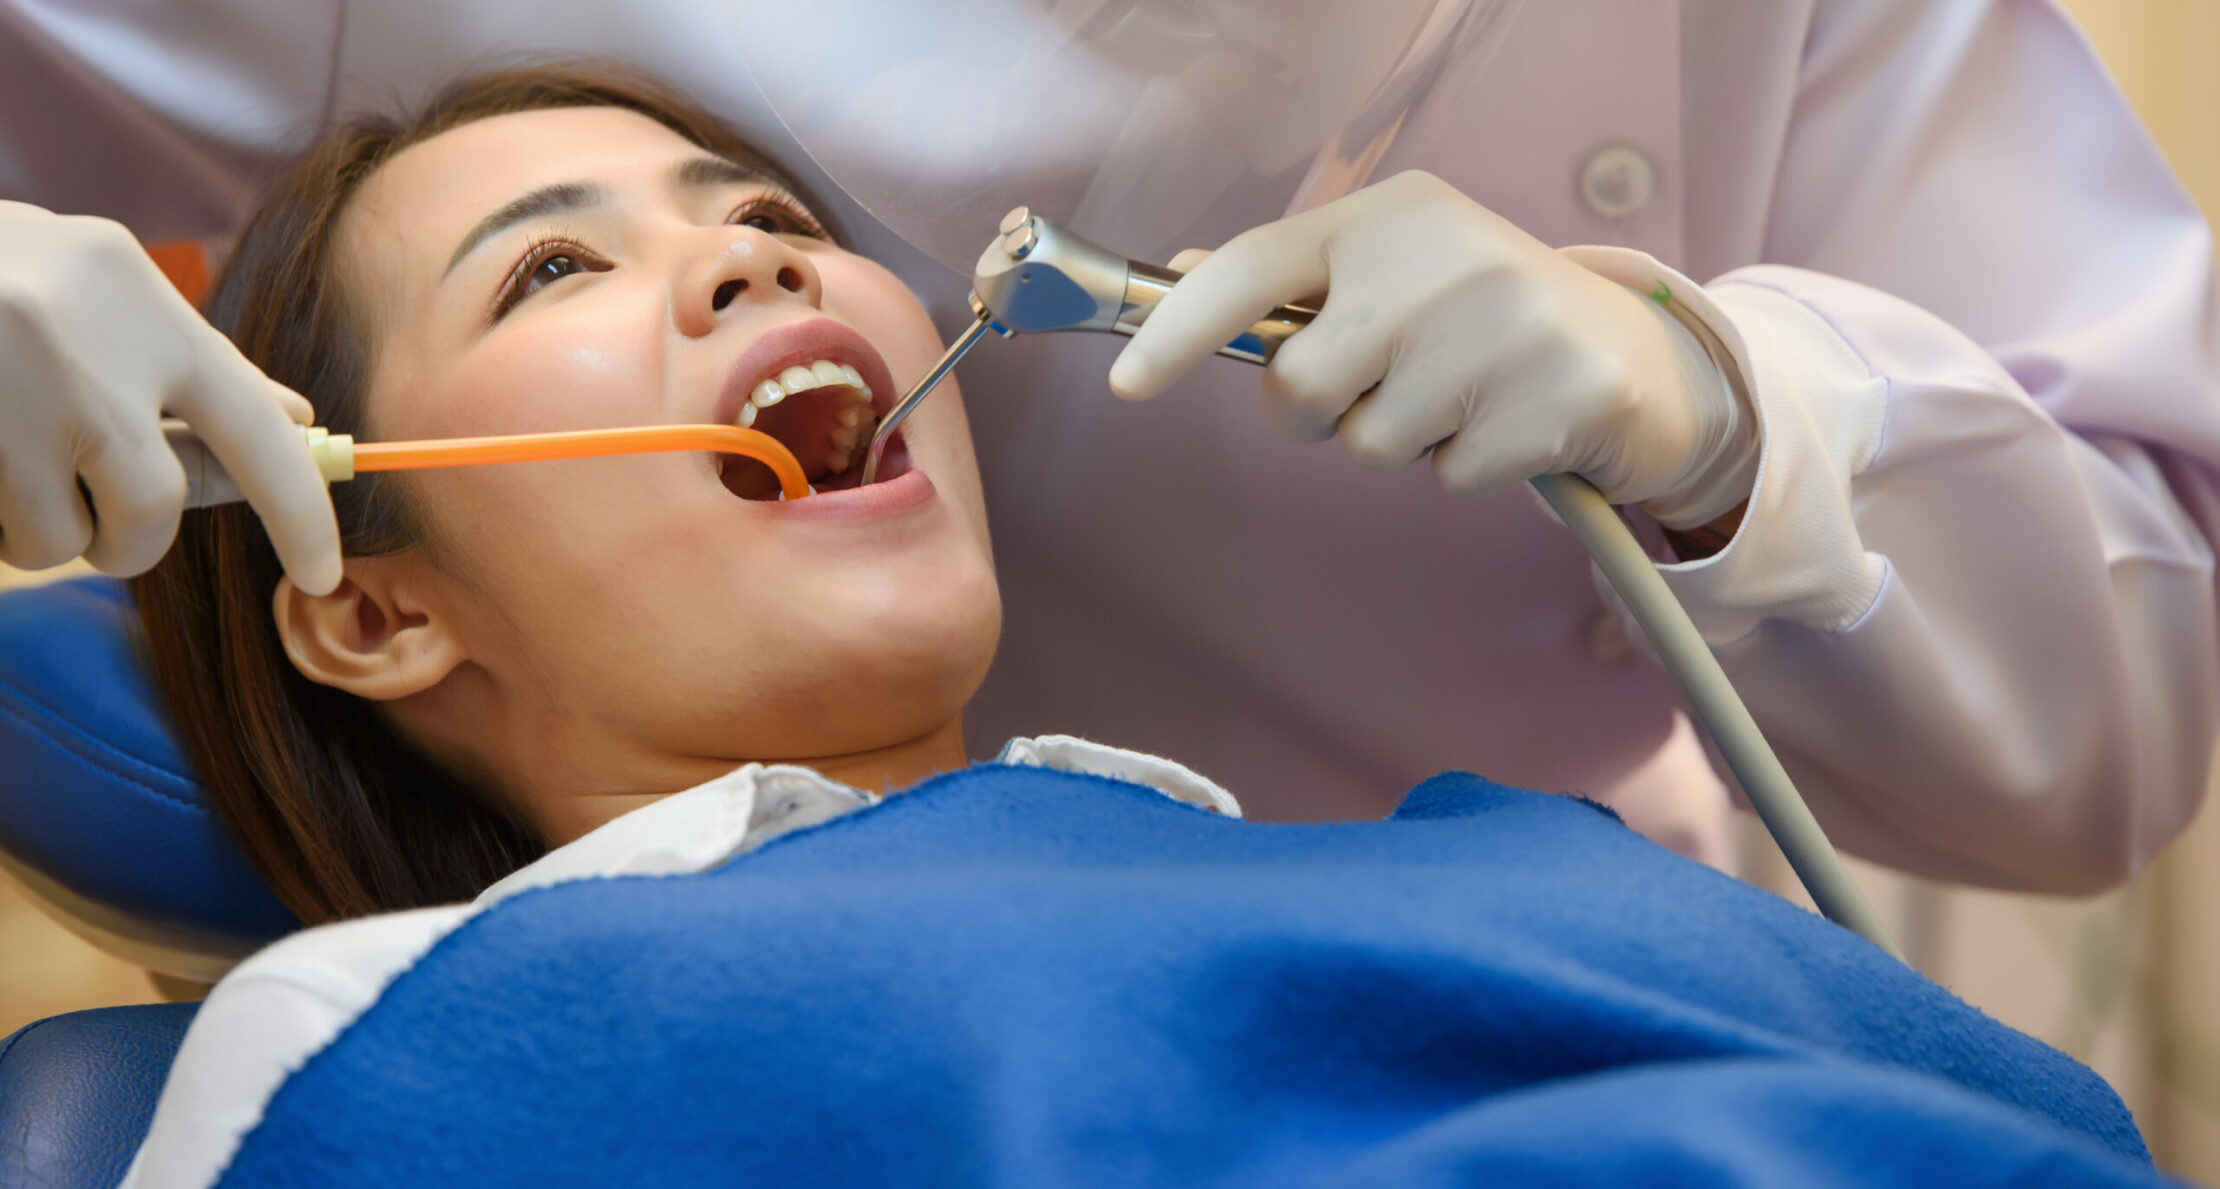 Why Do Dentists Blow Air Onto Their Patients' Teeth?